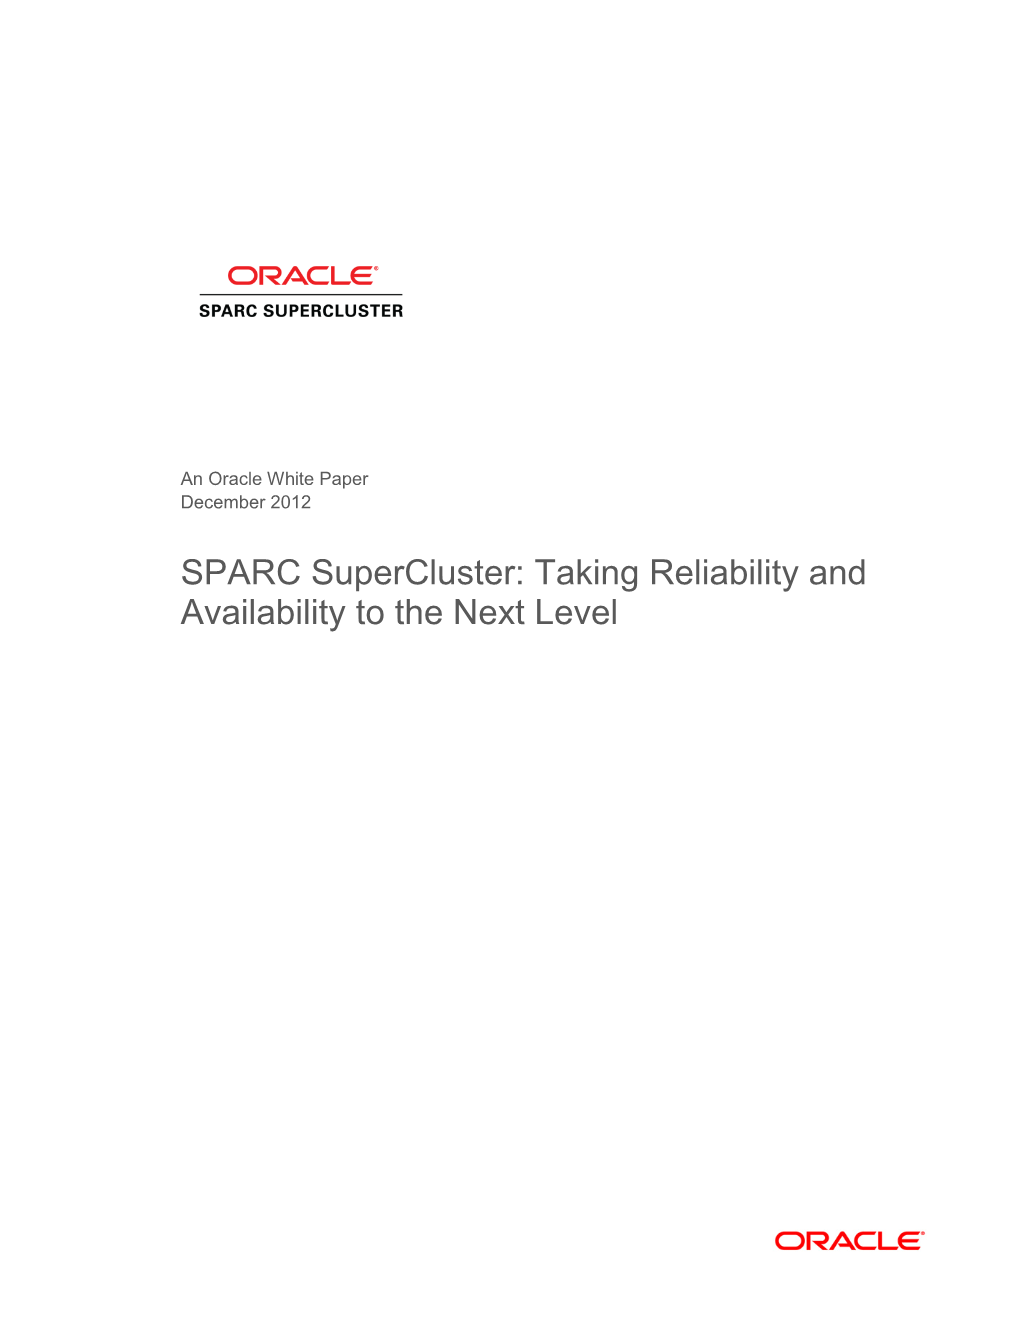 SPARC Supercluster: Taking Reliability and Availability to the Next Level